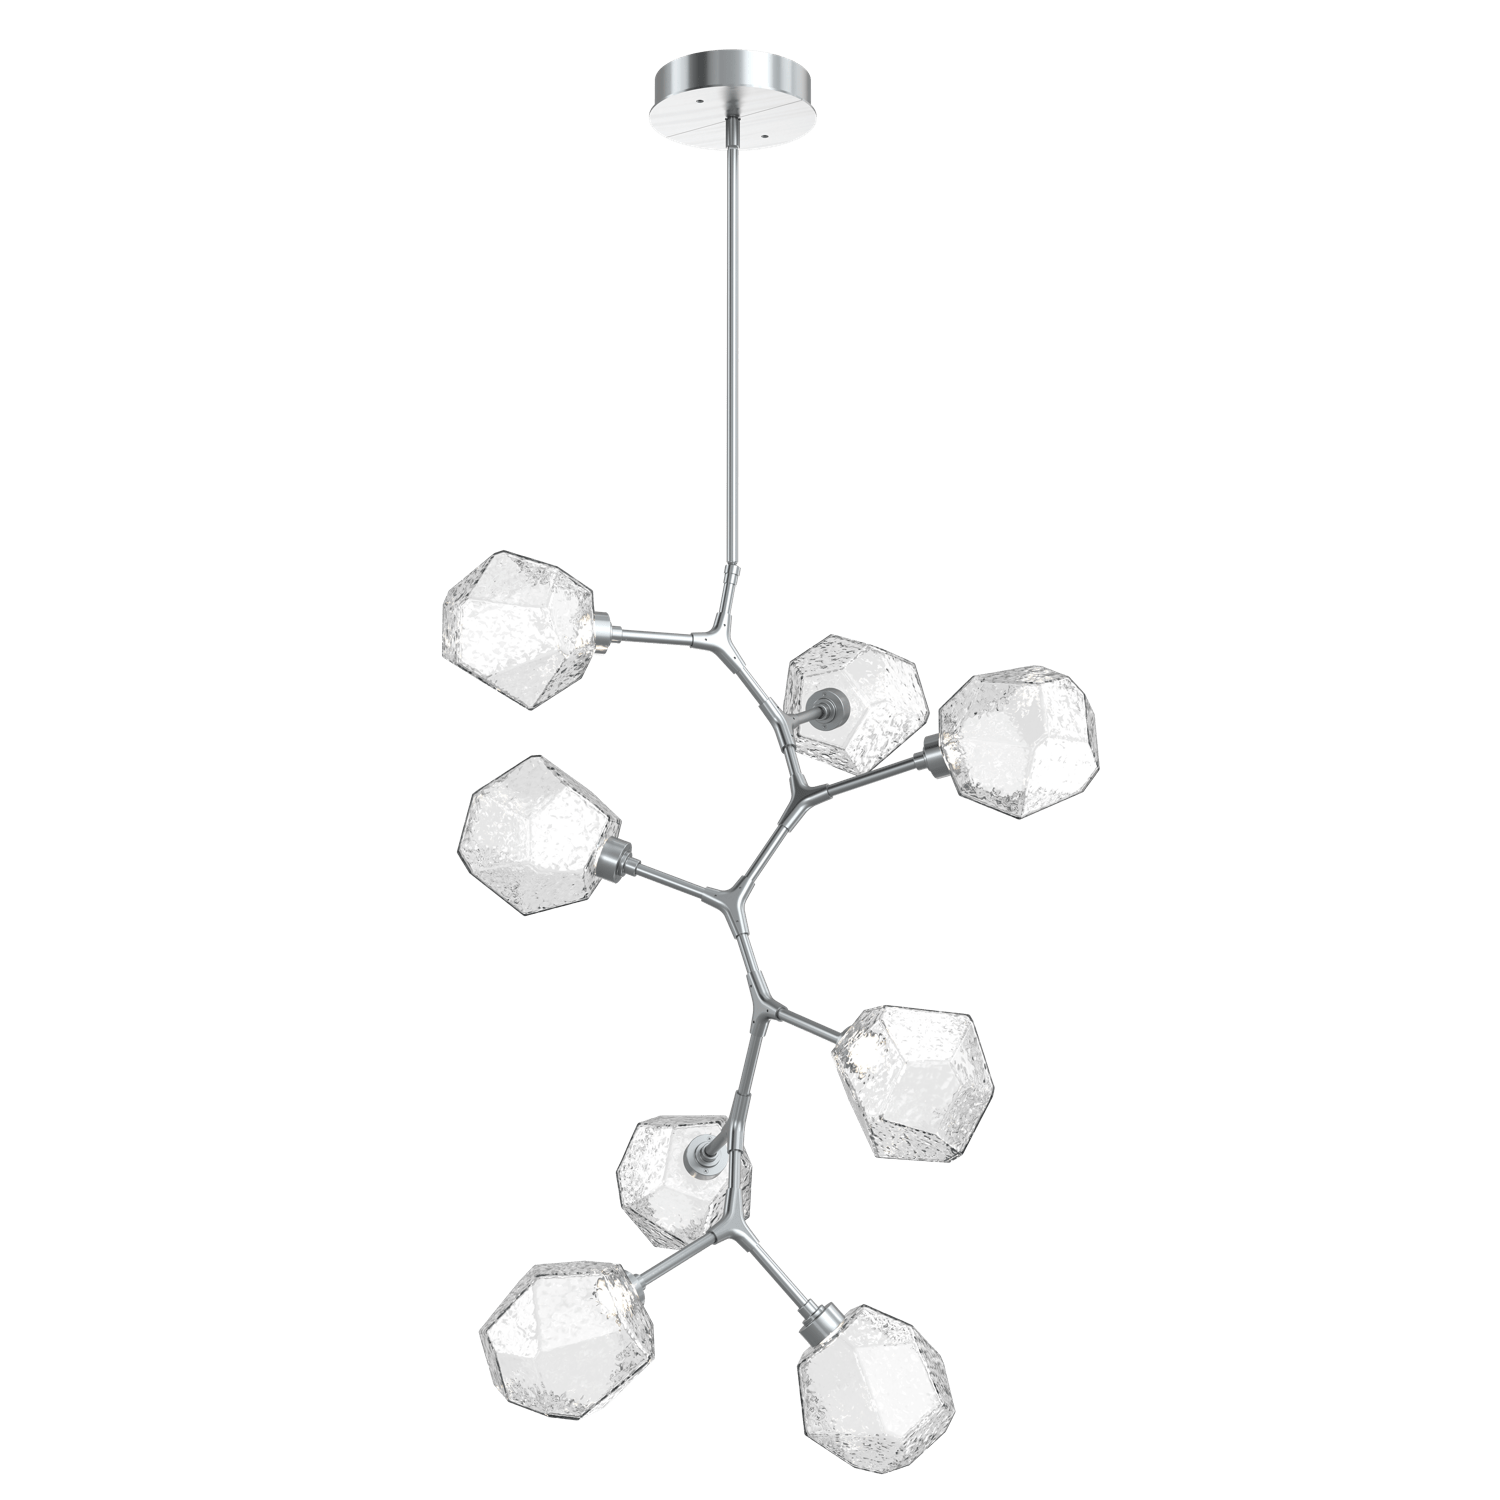 CHB0039-VB-SN-C-Hammerton-Studio-Gem-8-light-modern-vine-chandelier-with-satin-nickel-finish-and-clear-blown-glass-shades-and-LED-lamping